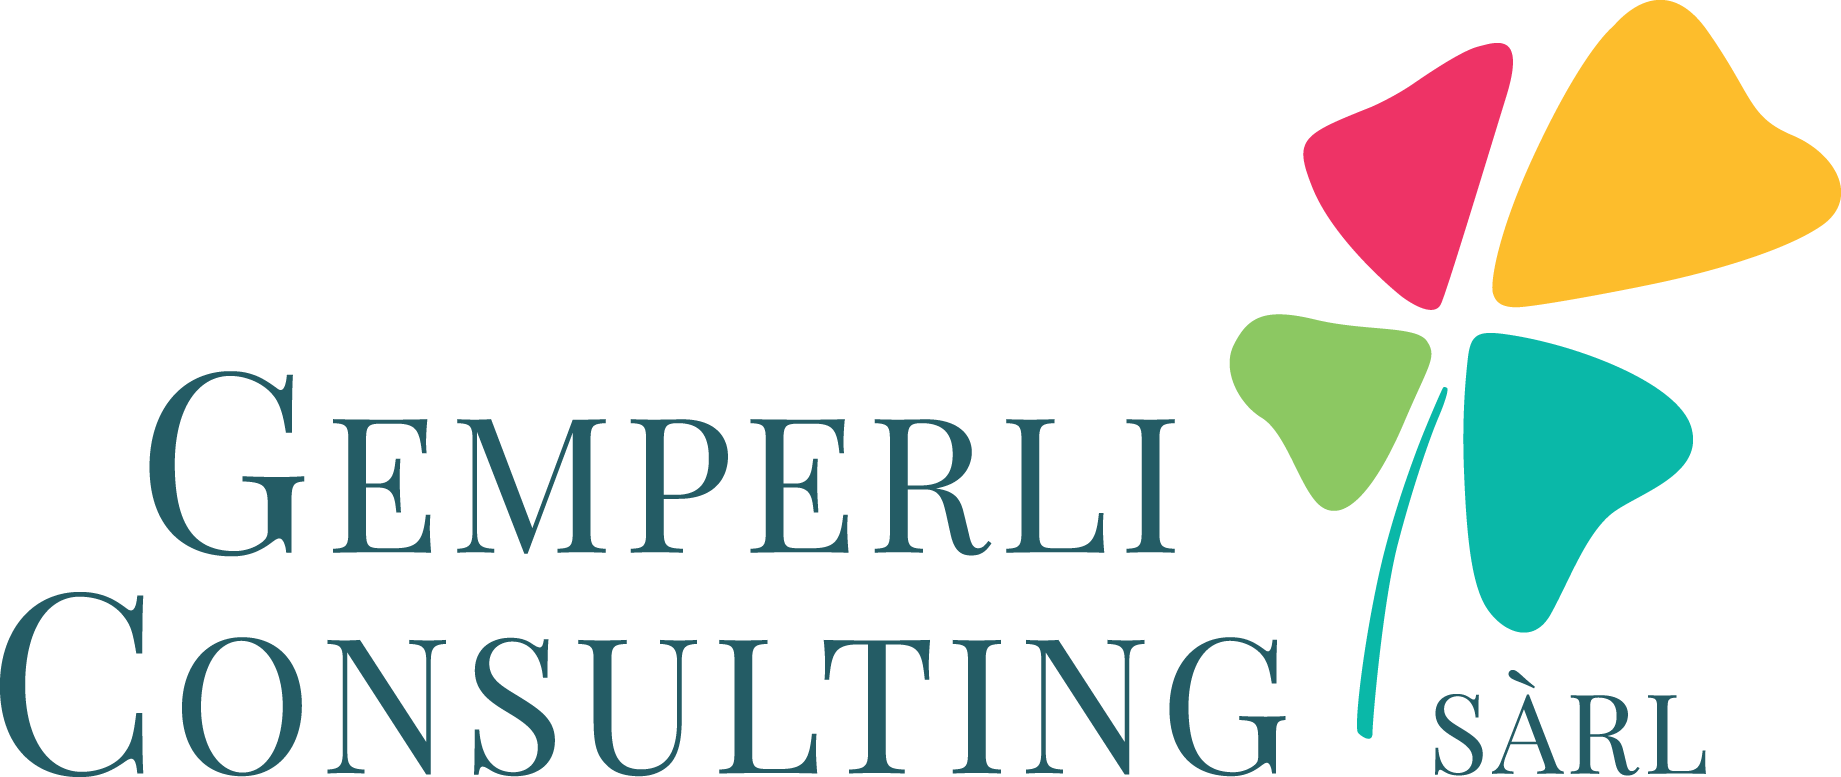 http://amiable-test.ch/wp-content/uploads/2020/11/logo_gemperli_consulting_2lignes_couleur_pos_RVB.png